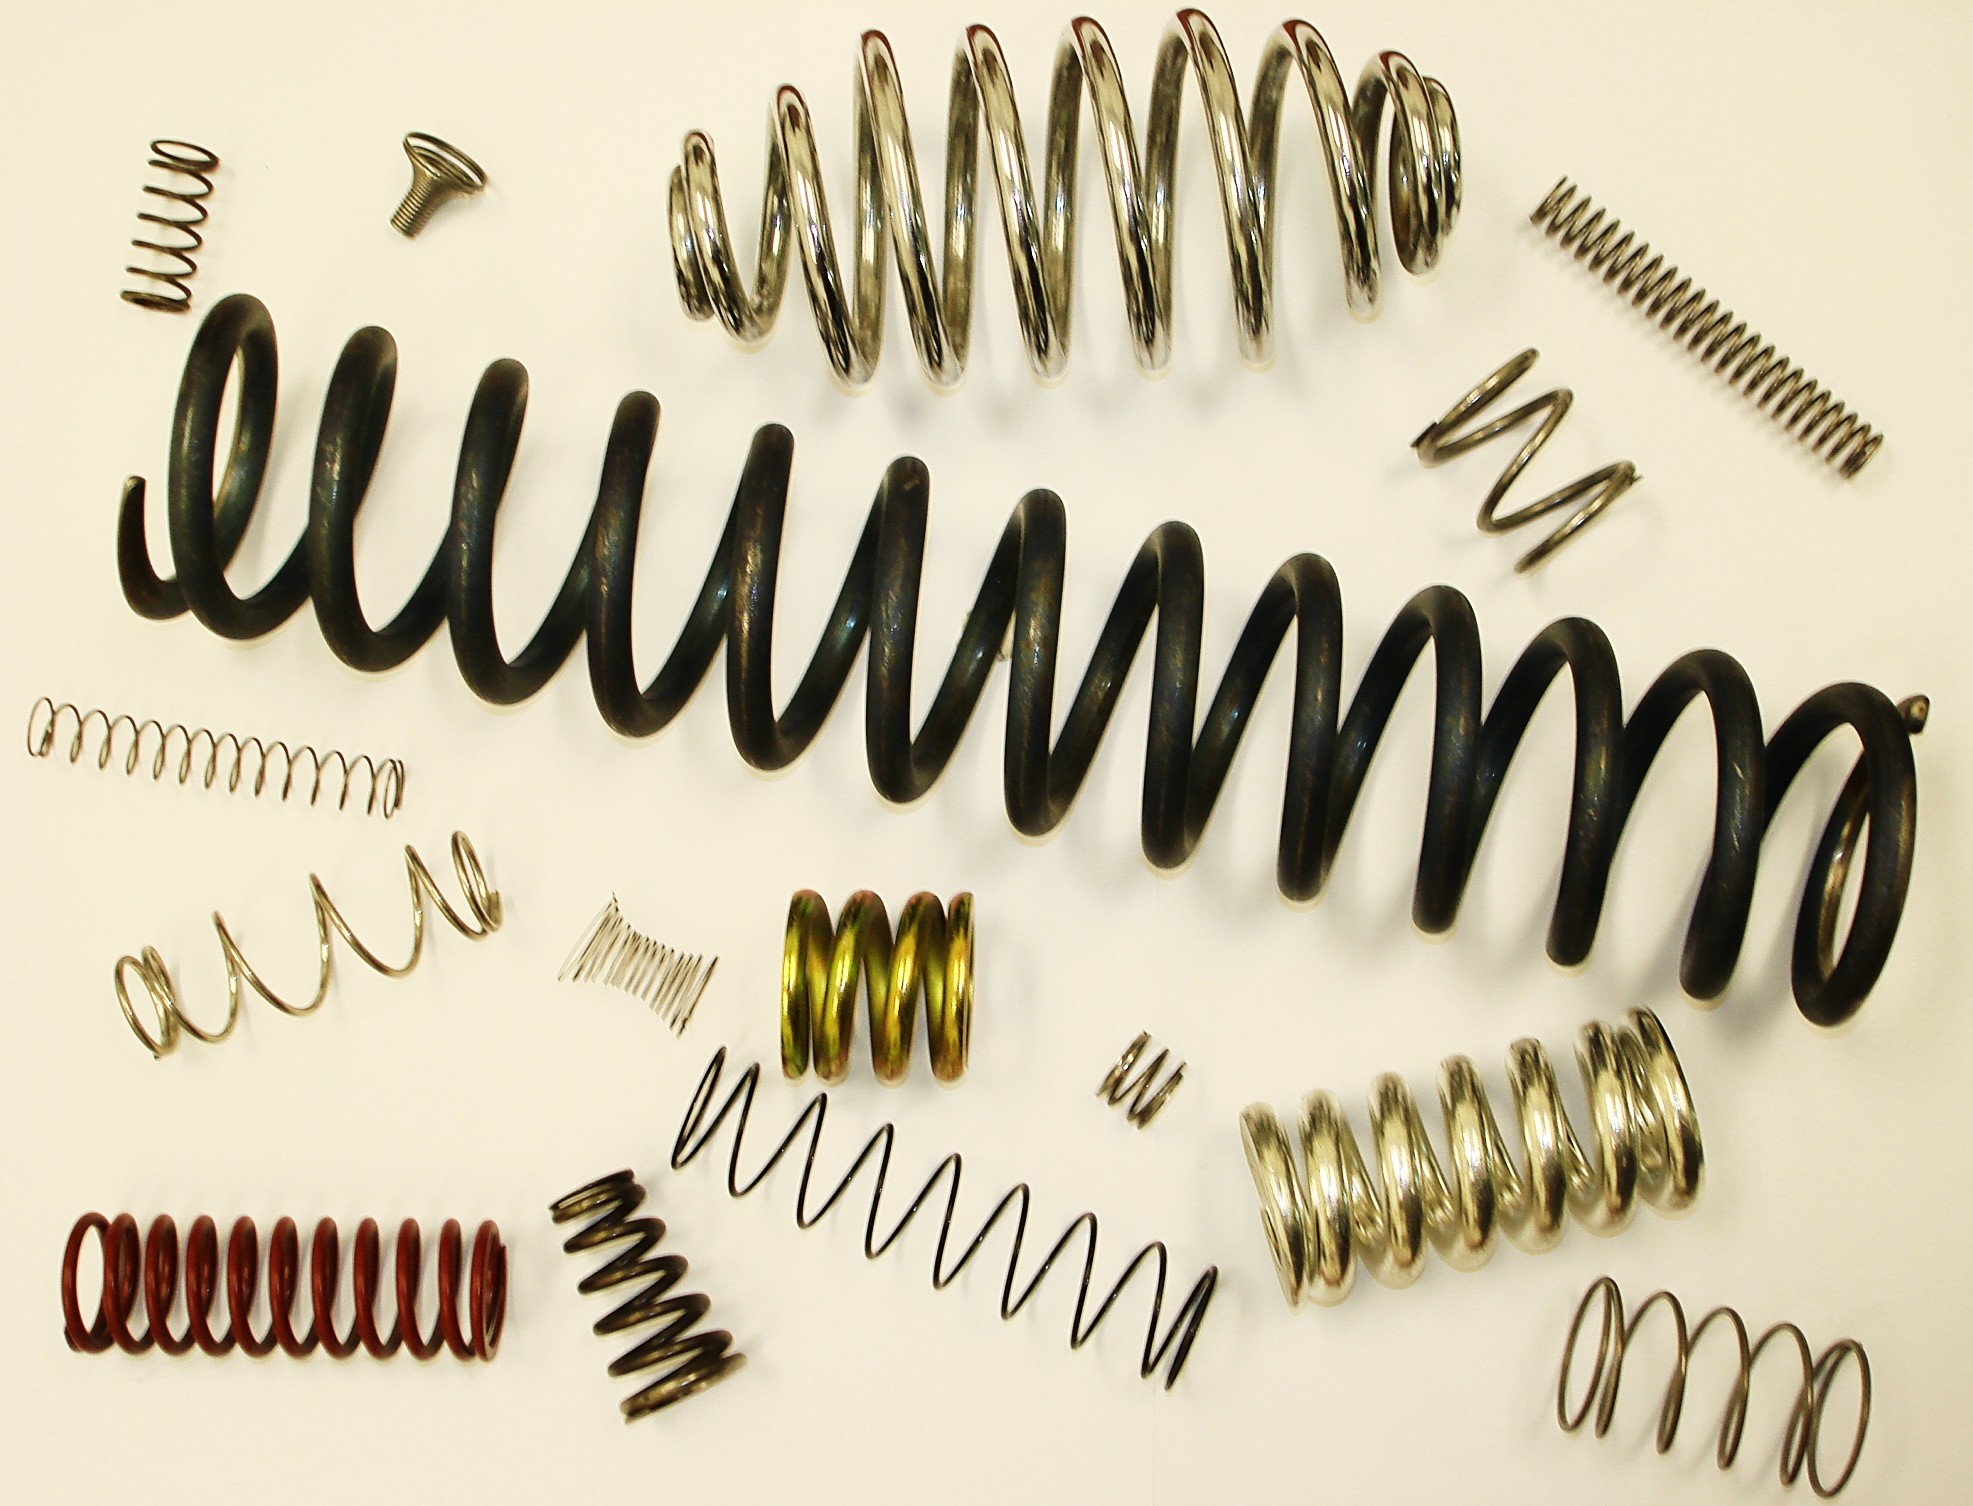 several different types of metal springs